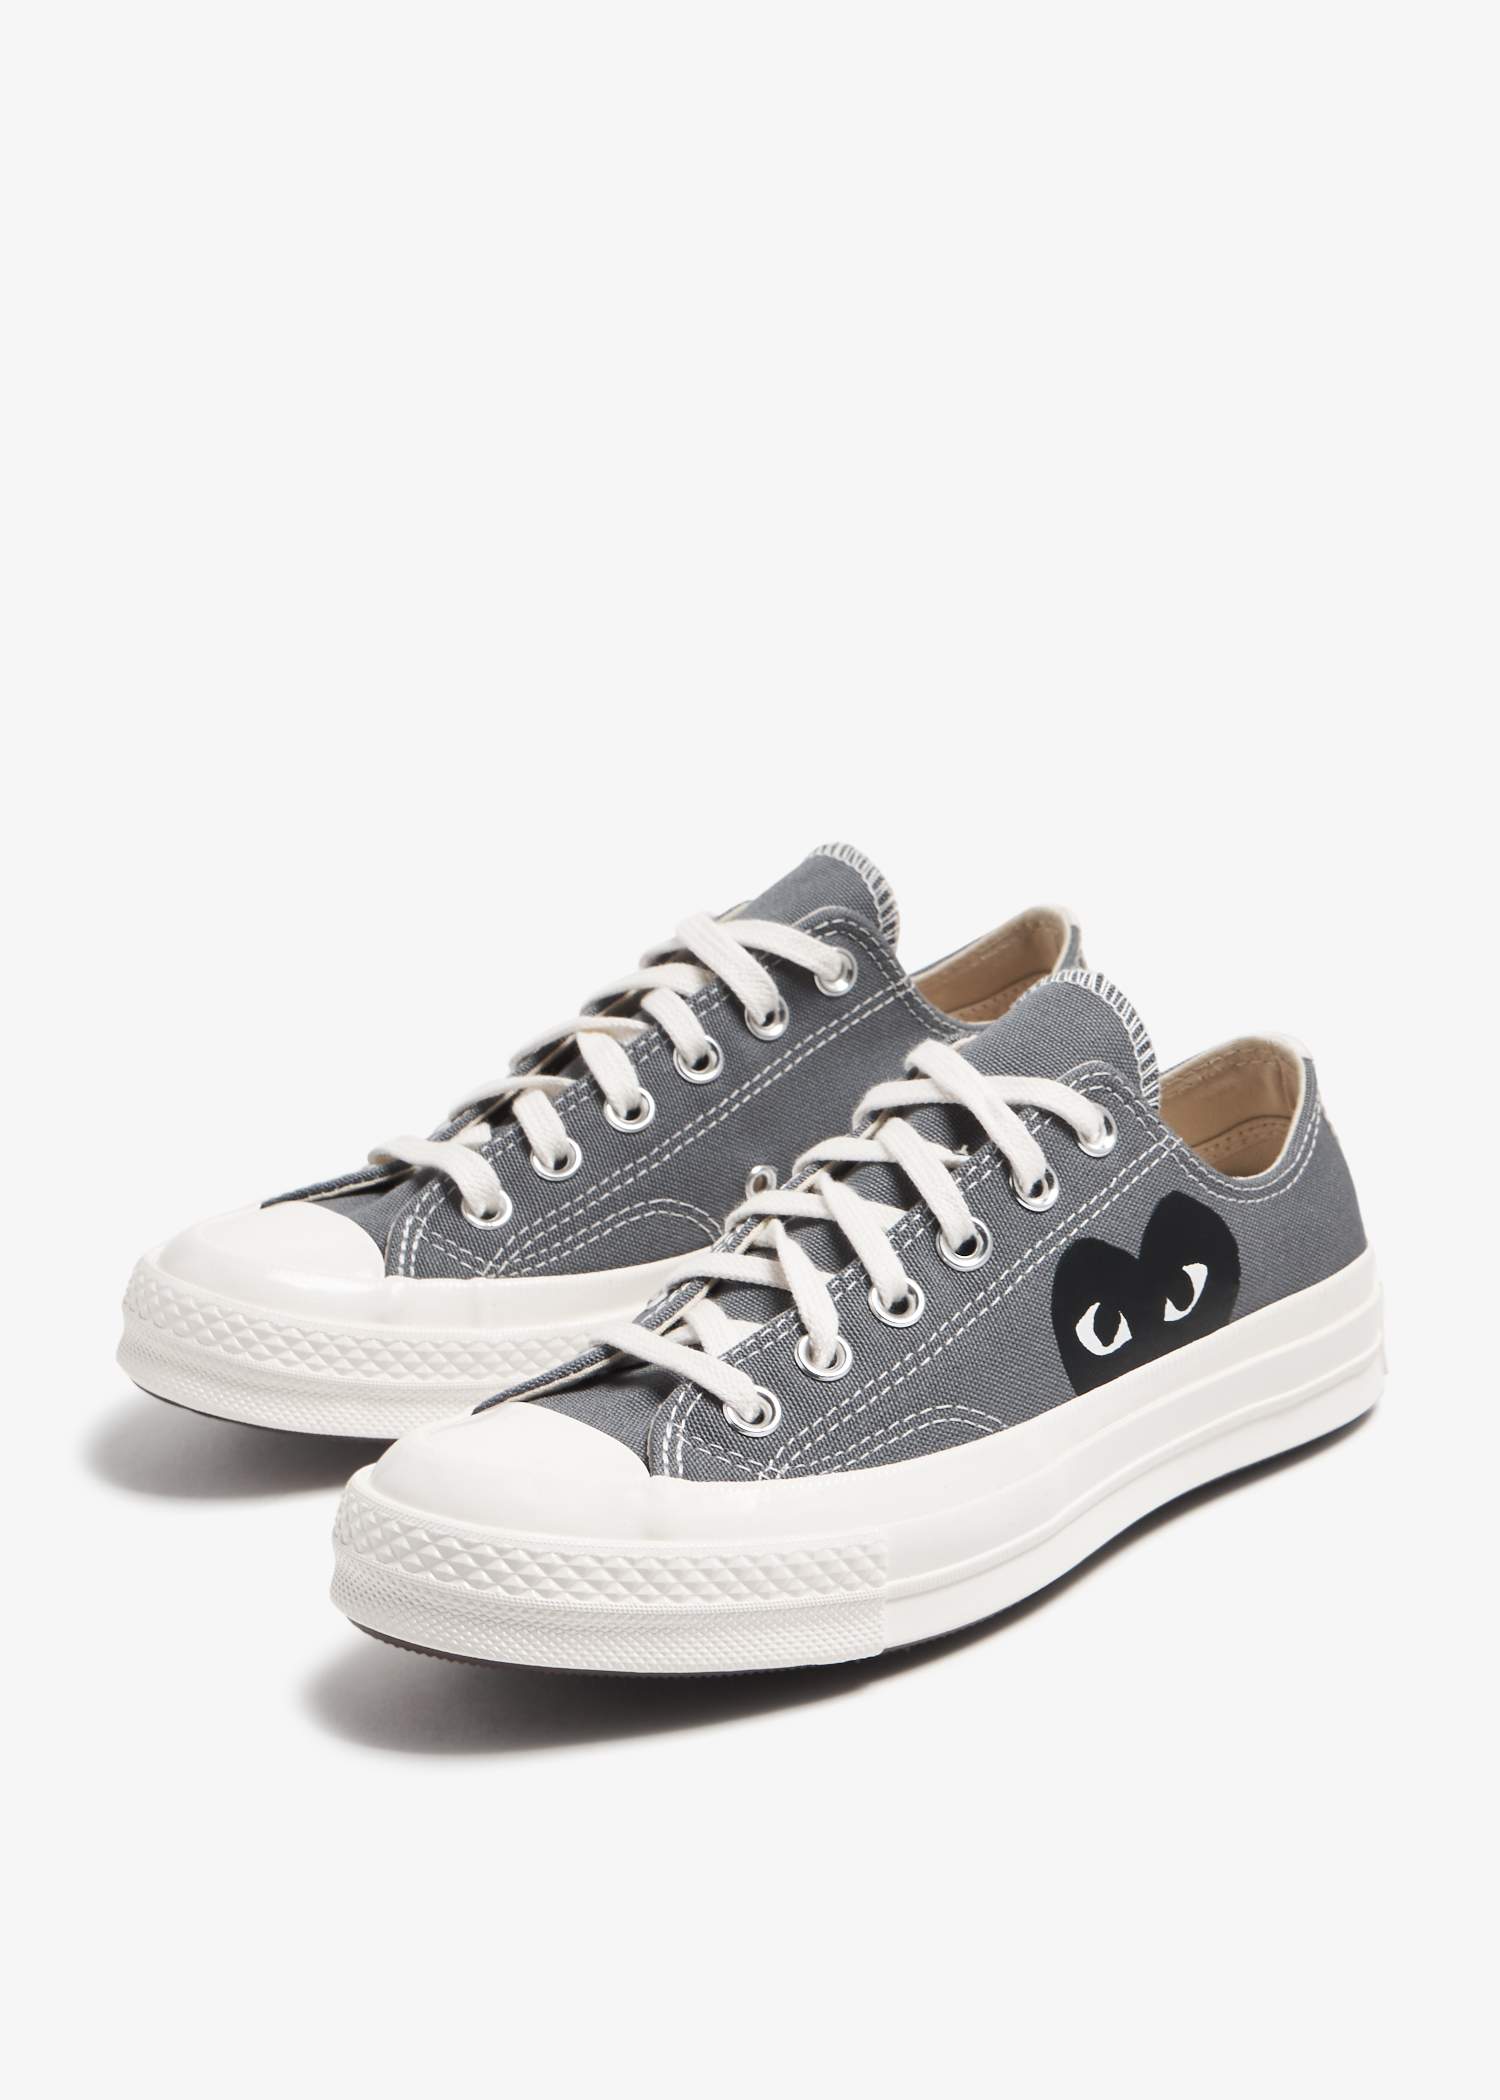 Comme des Garçons PLAY X Converse sneakers for Women - Grey in UAE 